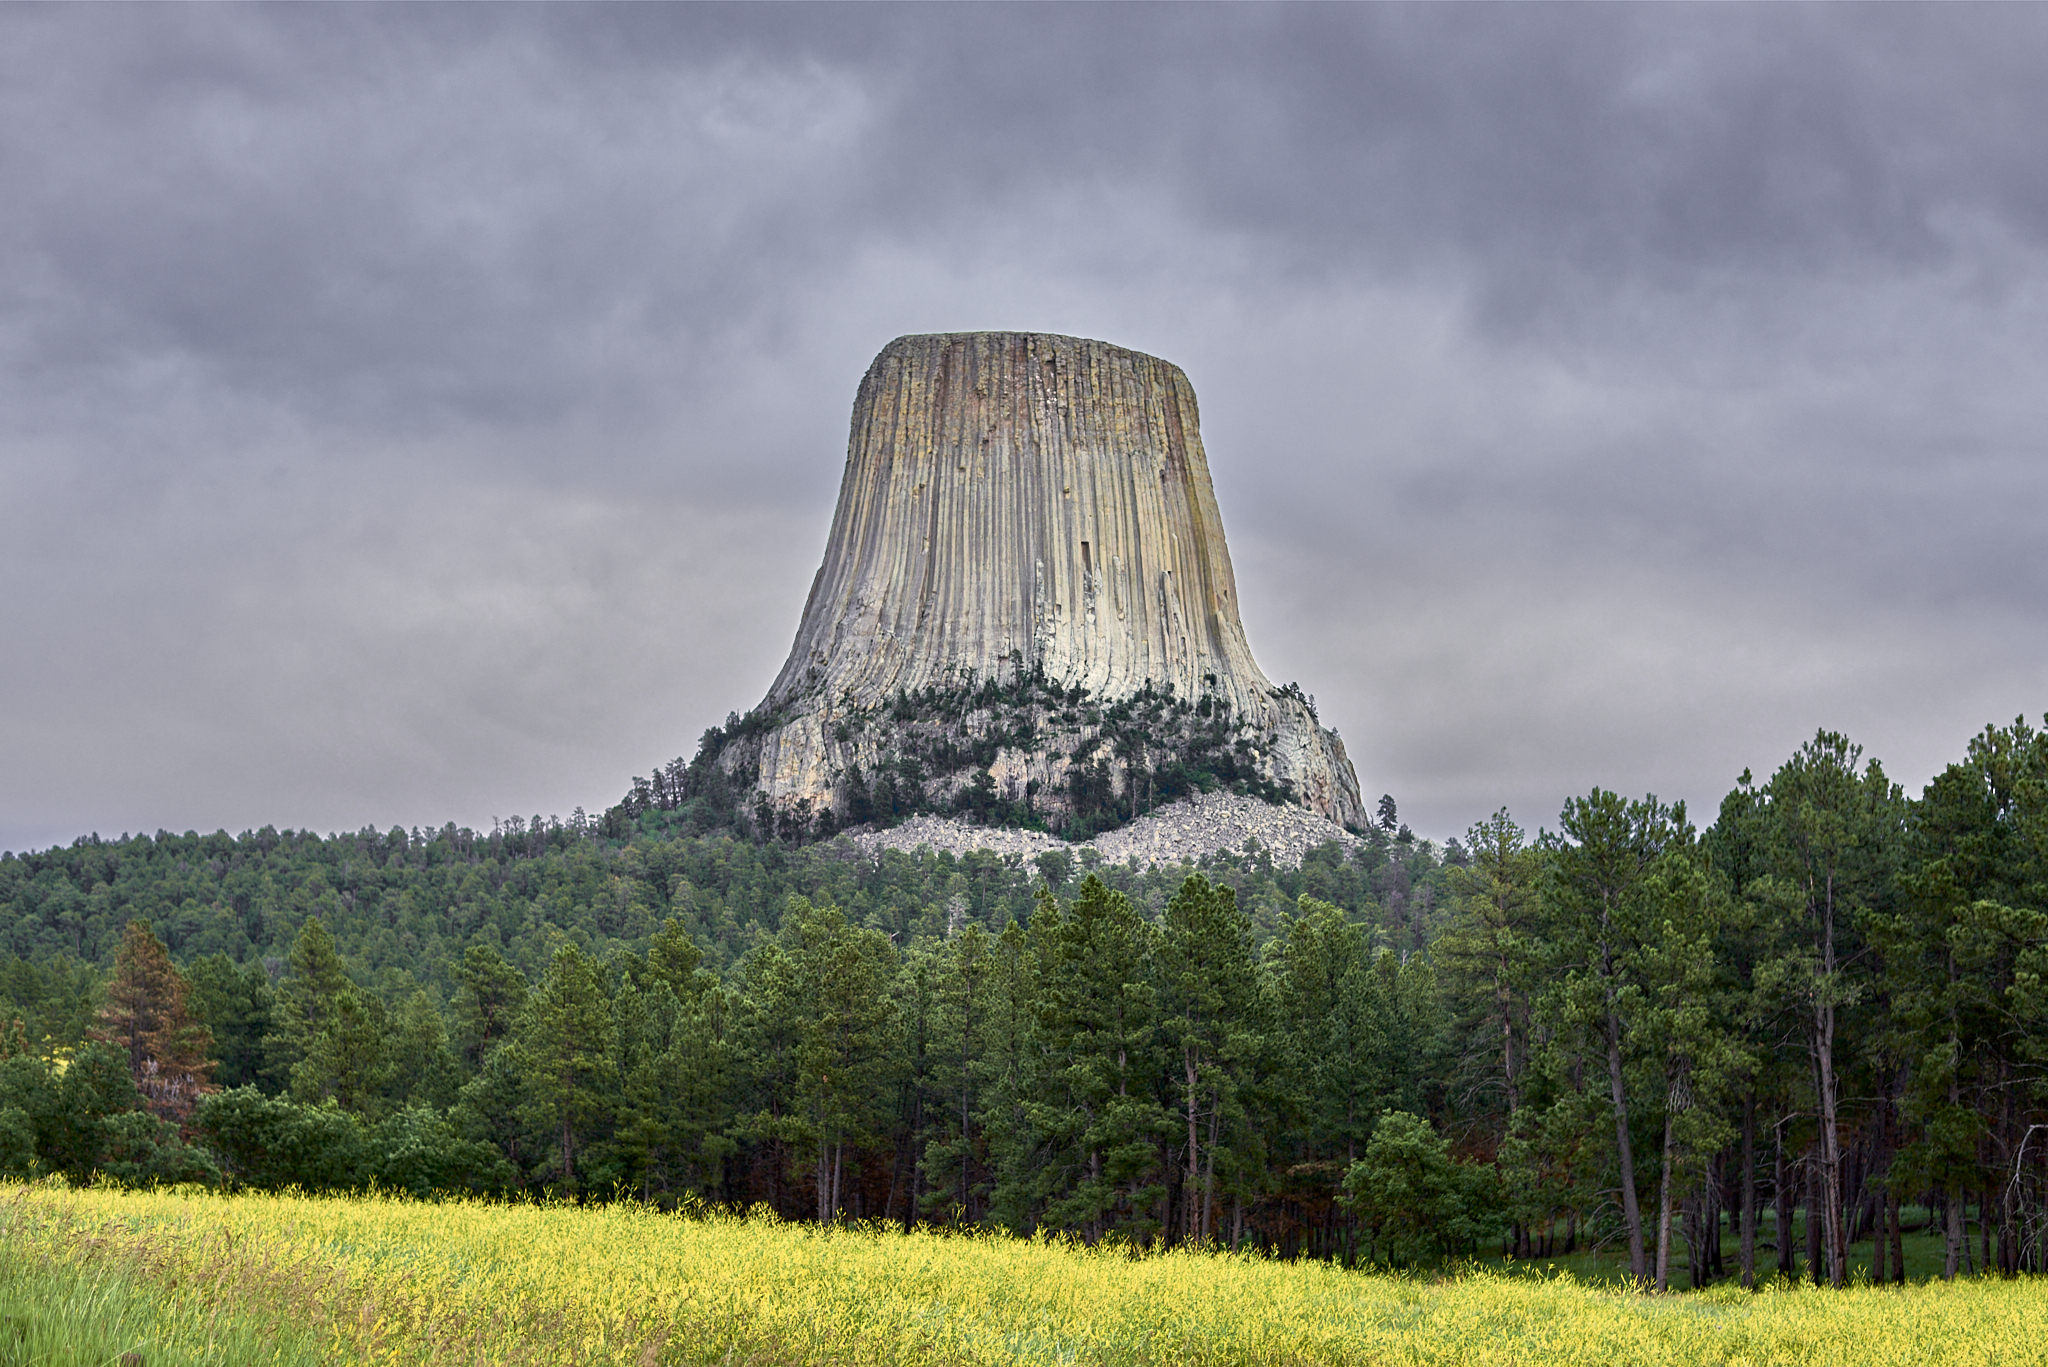 Landscapte #230706. A color photograph of Devil’s Tower, a field of yellow flowers and forest of trees in front of it.